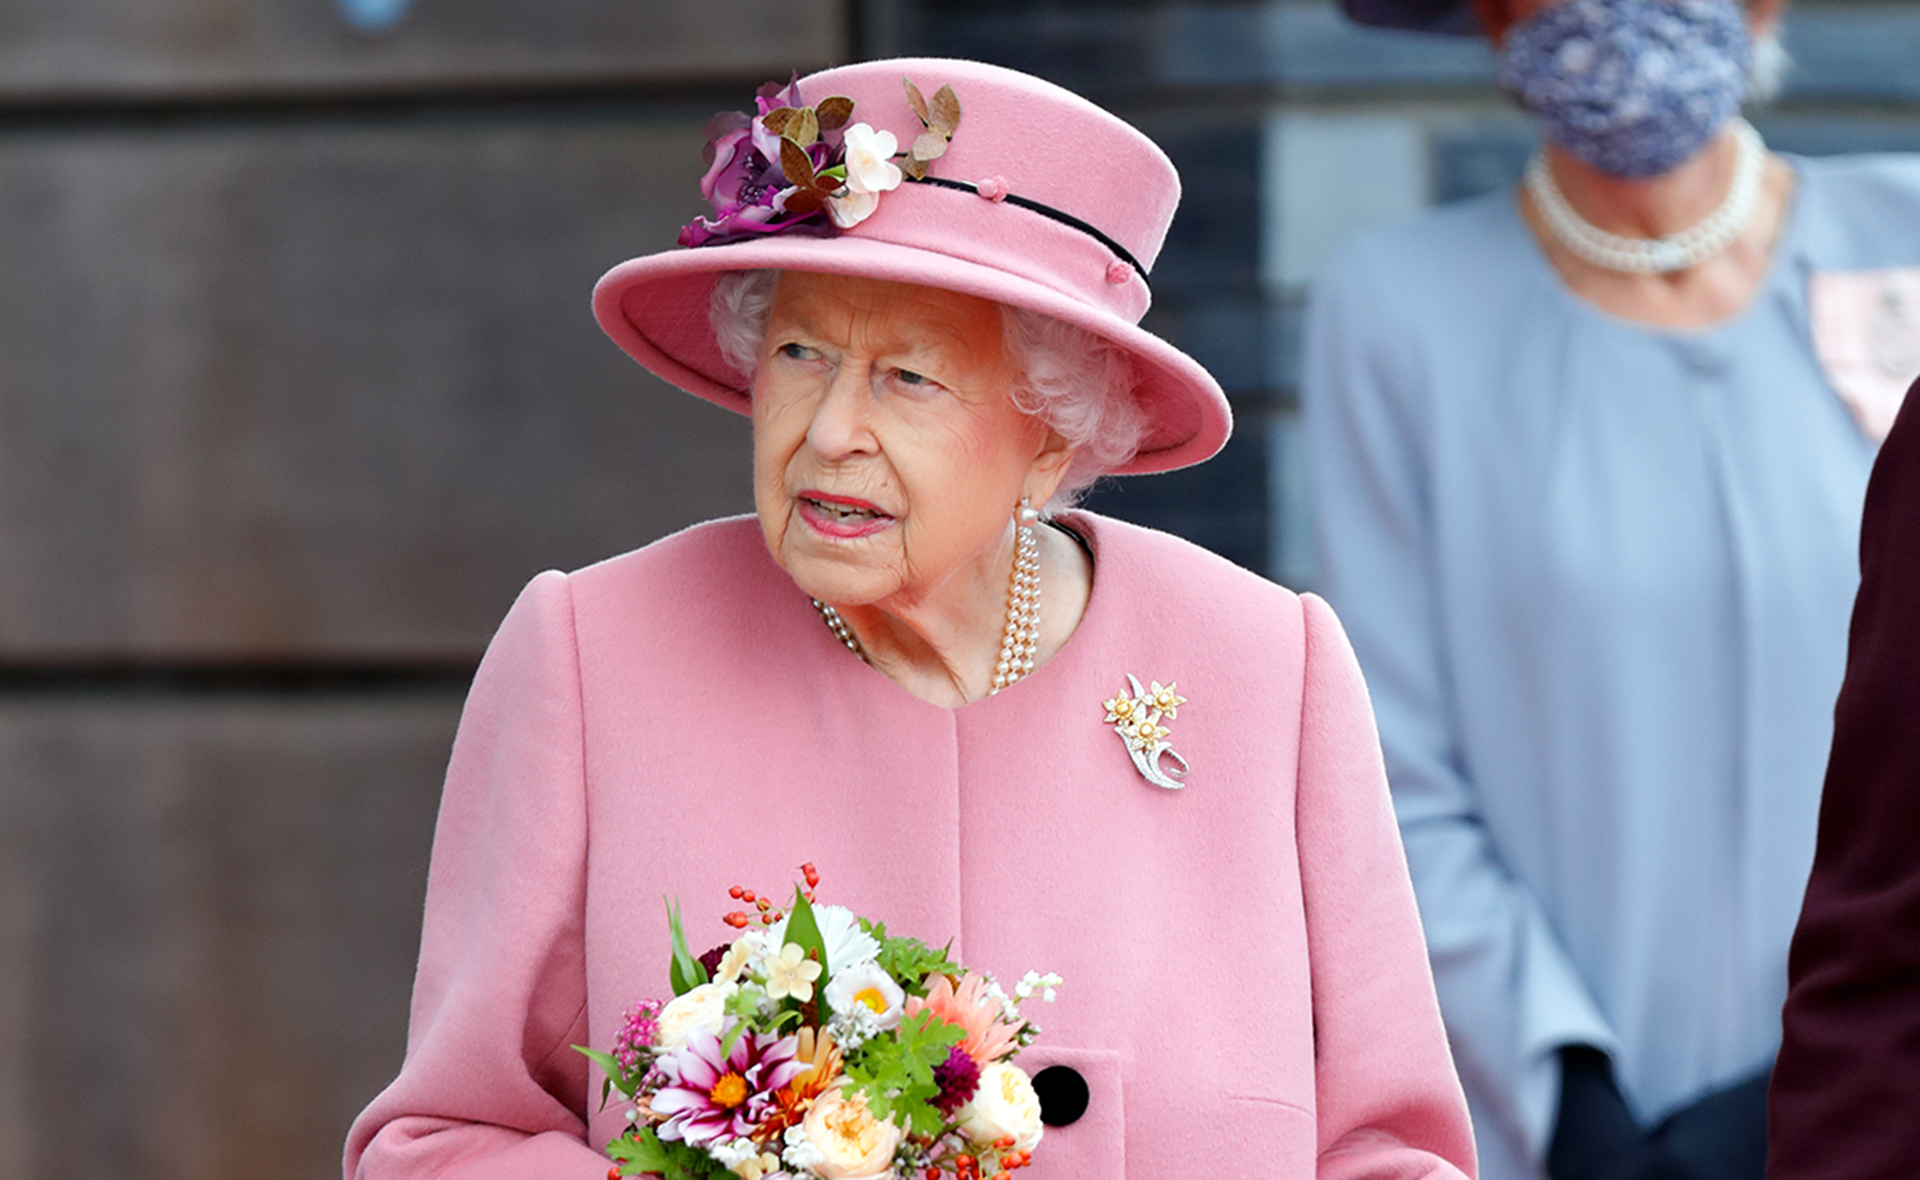 Queen Elizabeth II tests positive for COVID-19 after avoiding the virus for almost two years